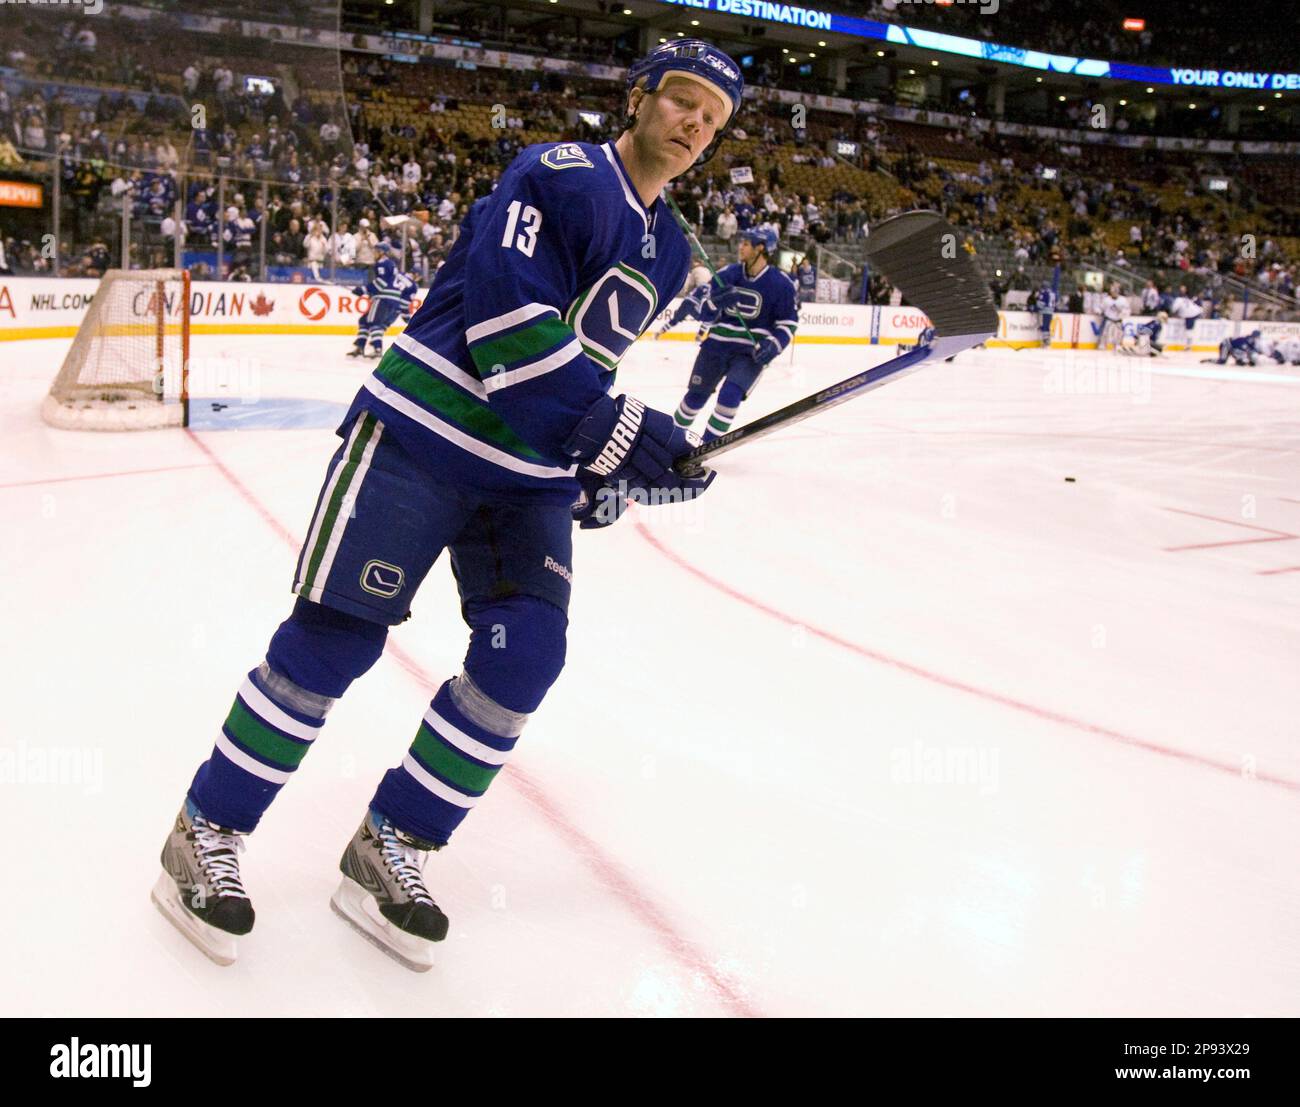 Mats sundin hi-res stock photography and images - Alamy